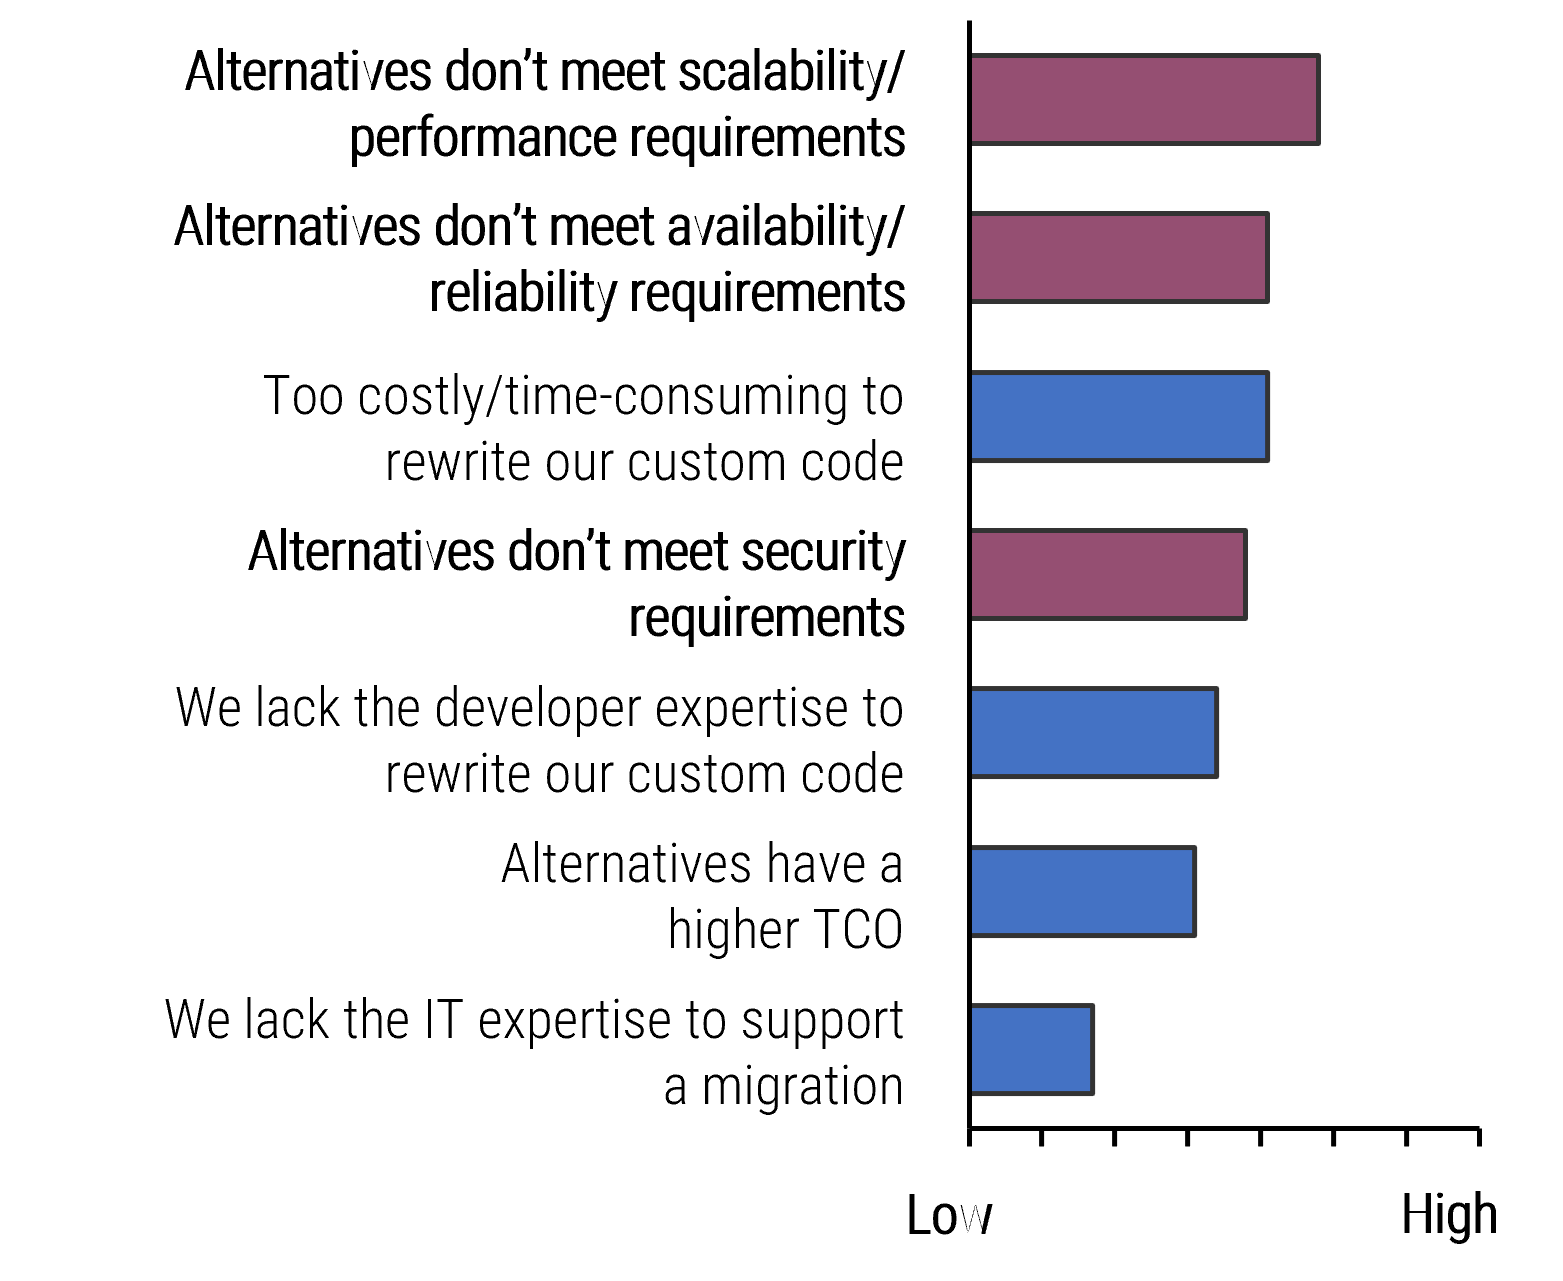 The image contains a bar graph that demonstrates challenges related to shortfalls of alternative platforms.